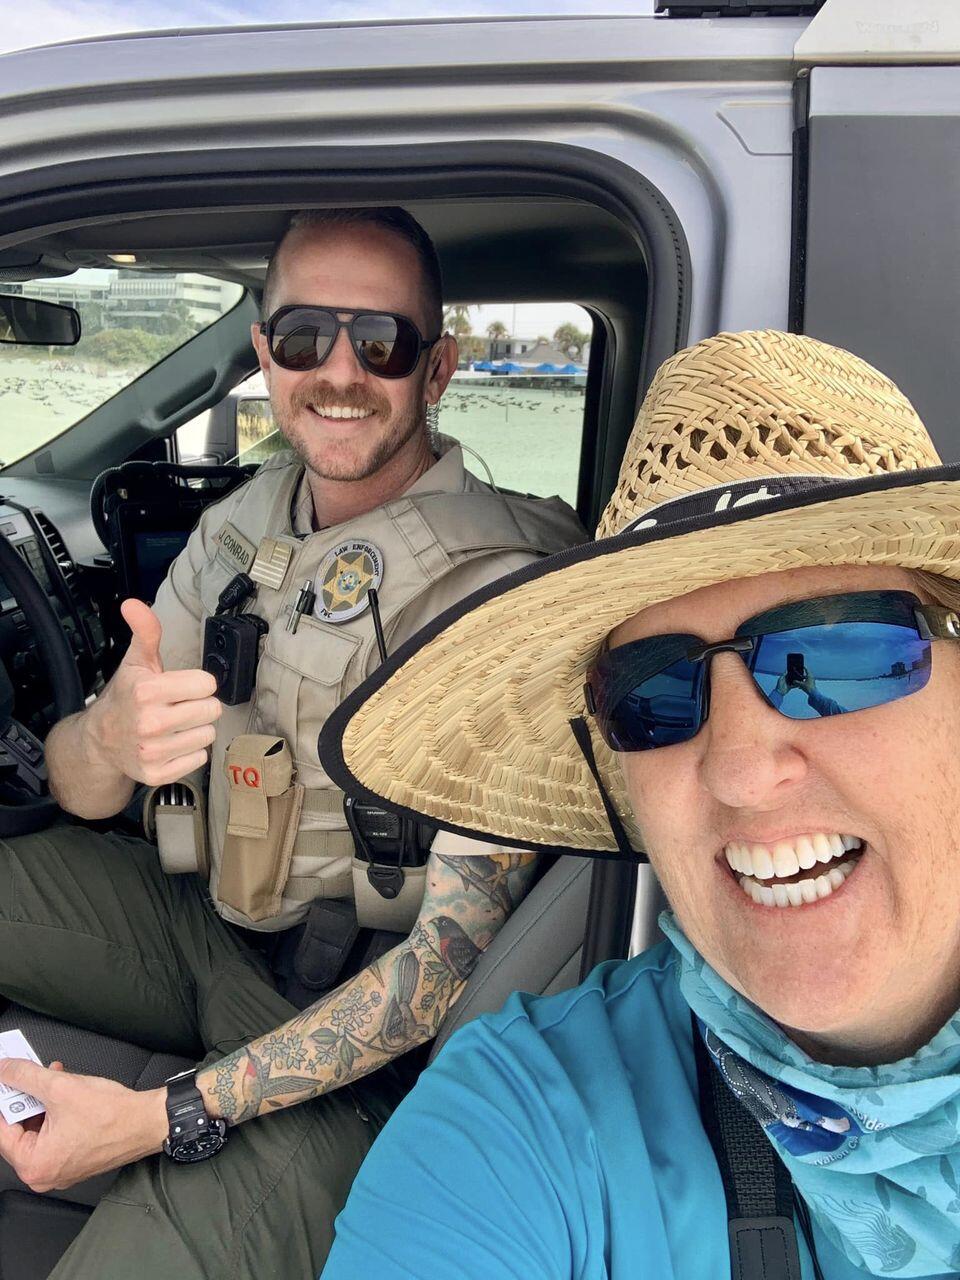 An officer in a truck gives a thumbs-up and smiles in a selfie taken by a volunteer bird steward beside him.